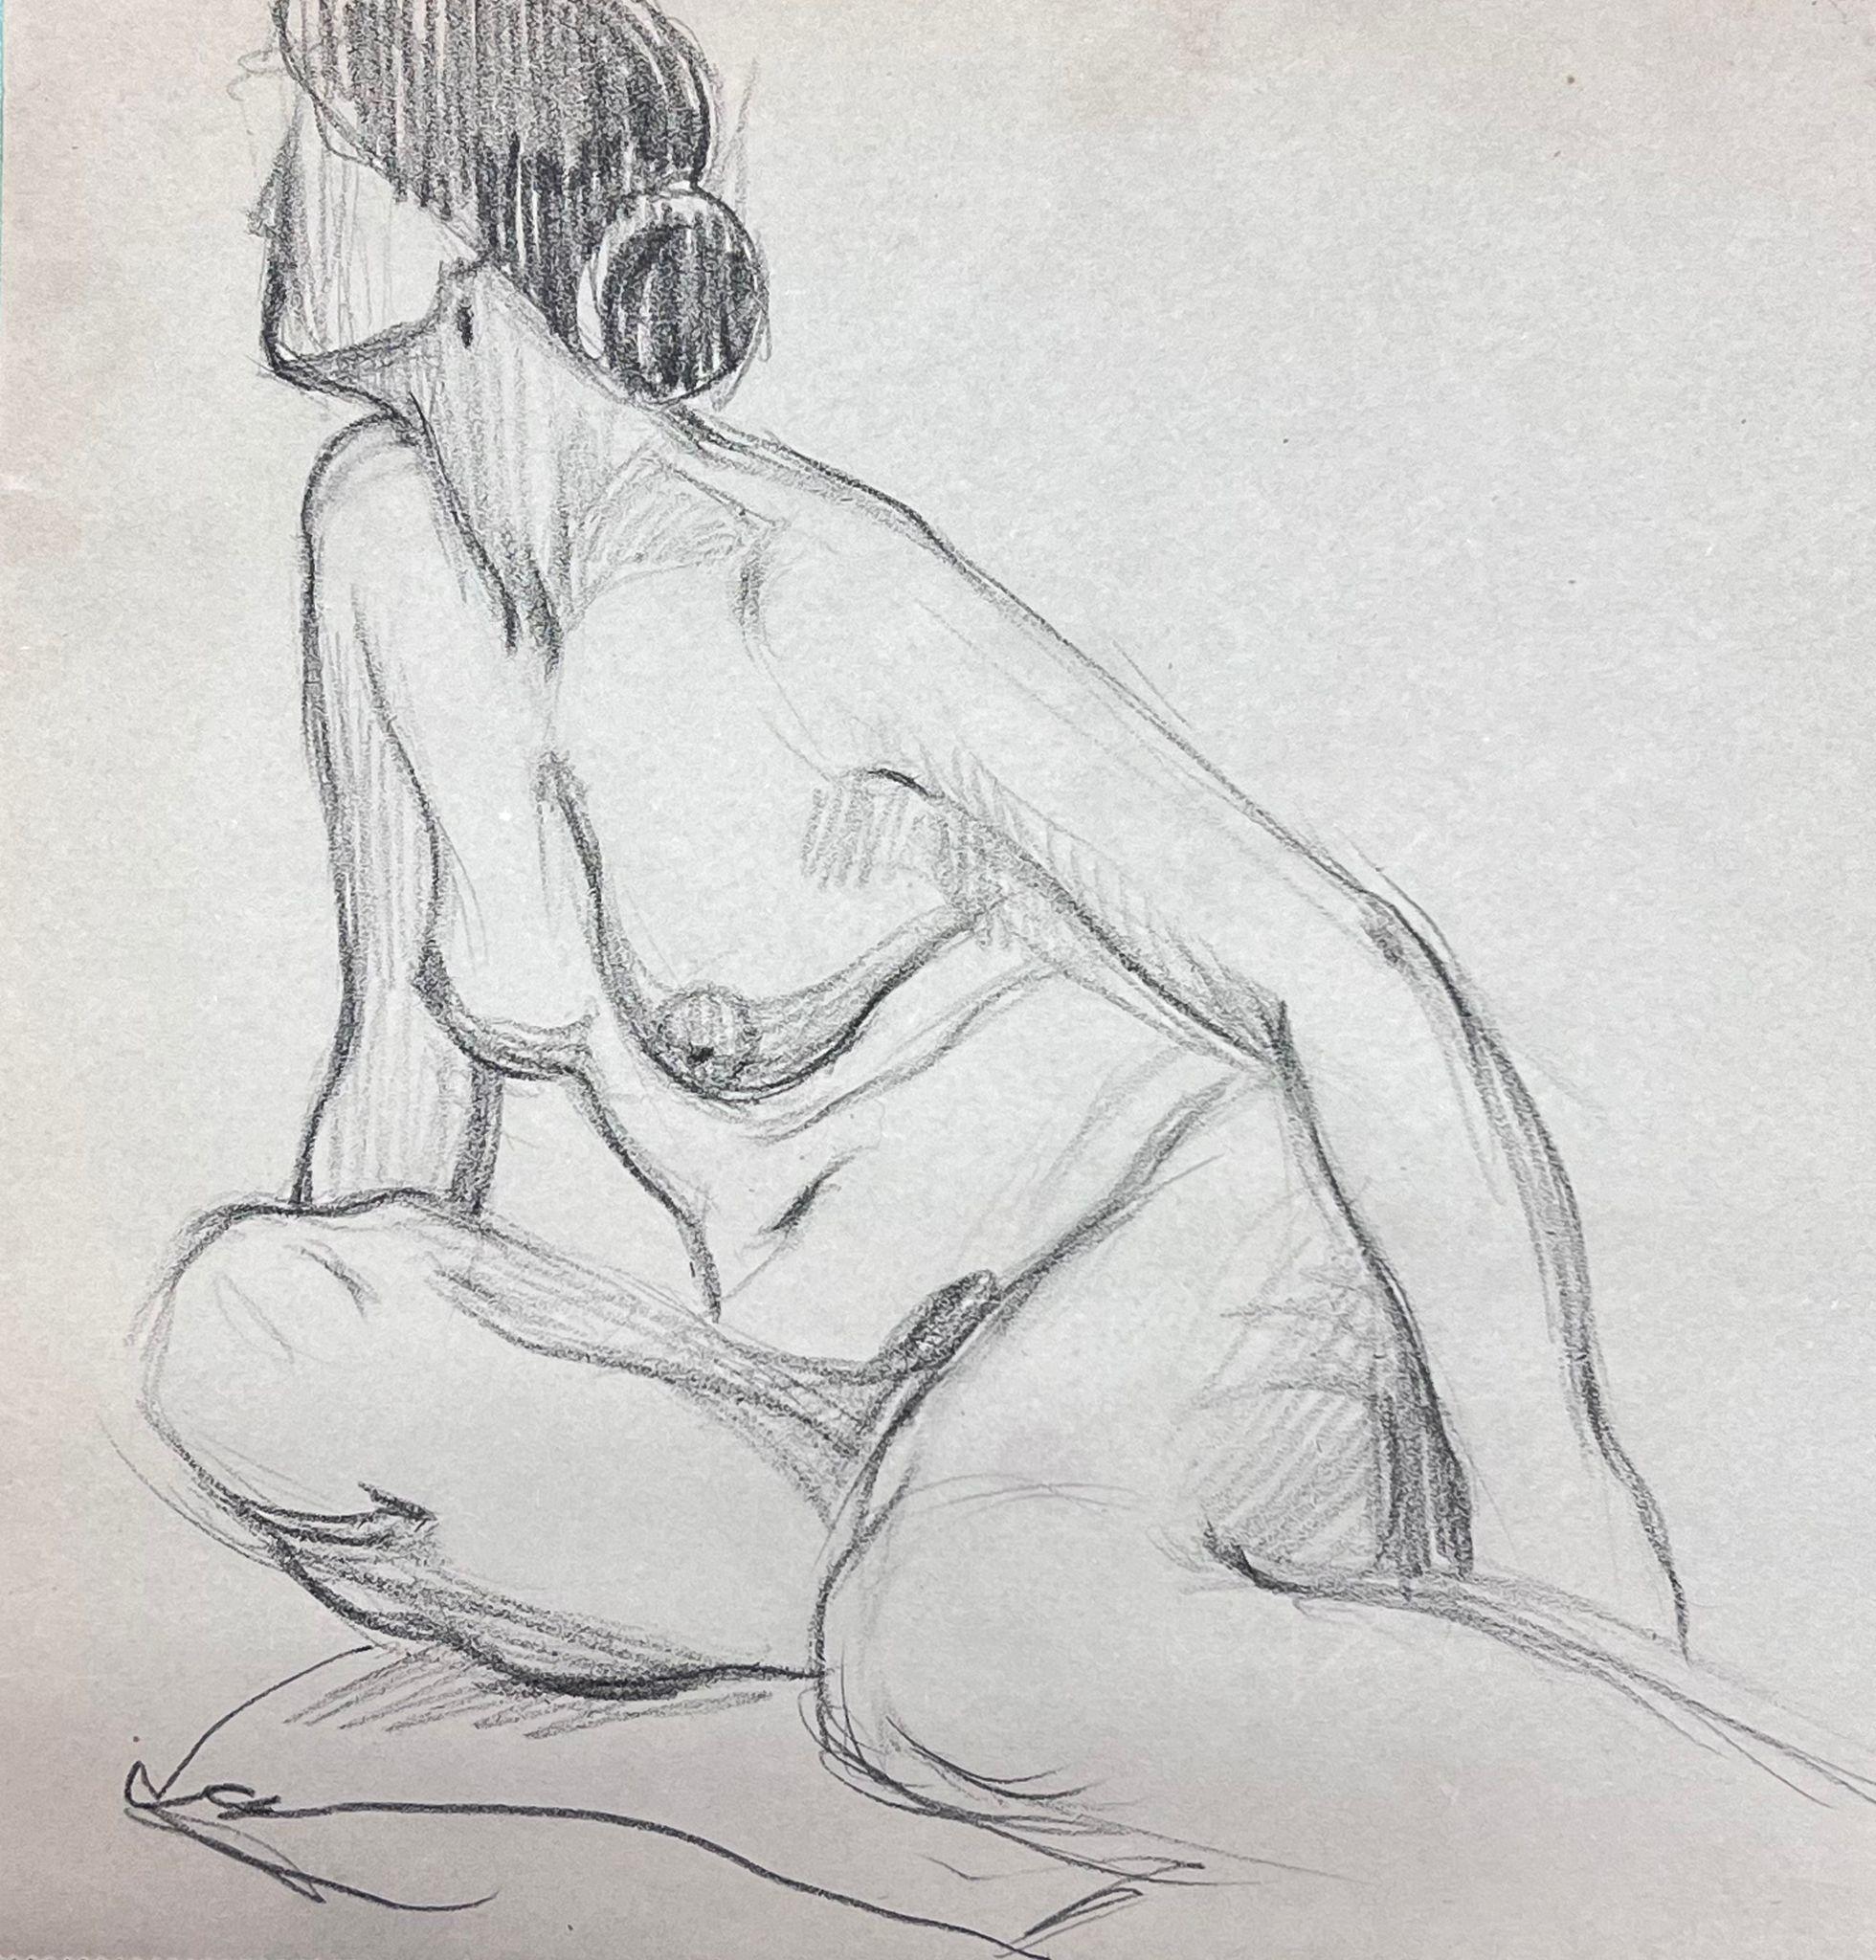 Nude Female
by Louise Alix (French, 1888-1980) *see notes below
provenance stamp to the back 
pencil drawing on artist paper, unframed
measures: 8 high by 10 inches wide
condition: overall very good and sound, a few scuffs and marks to the surface